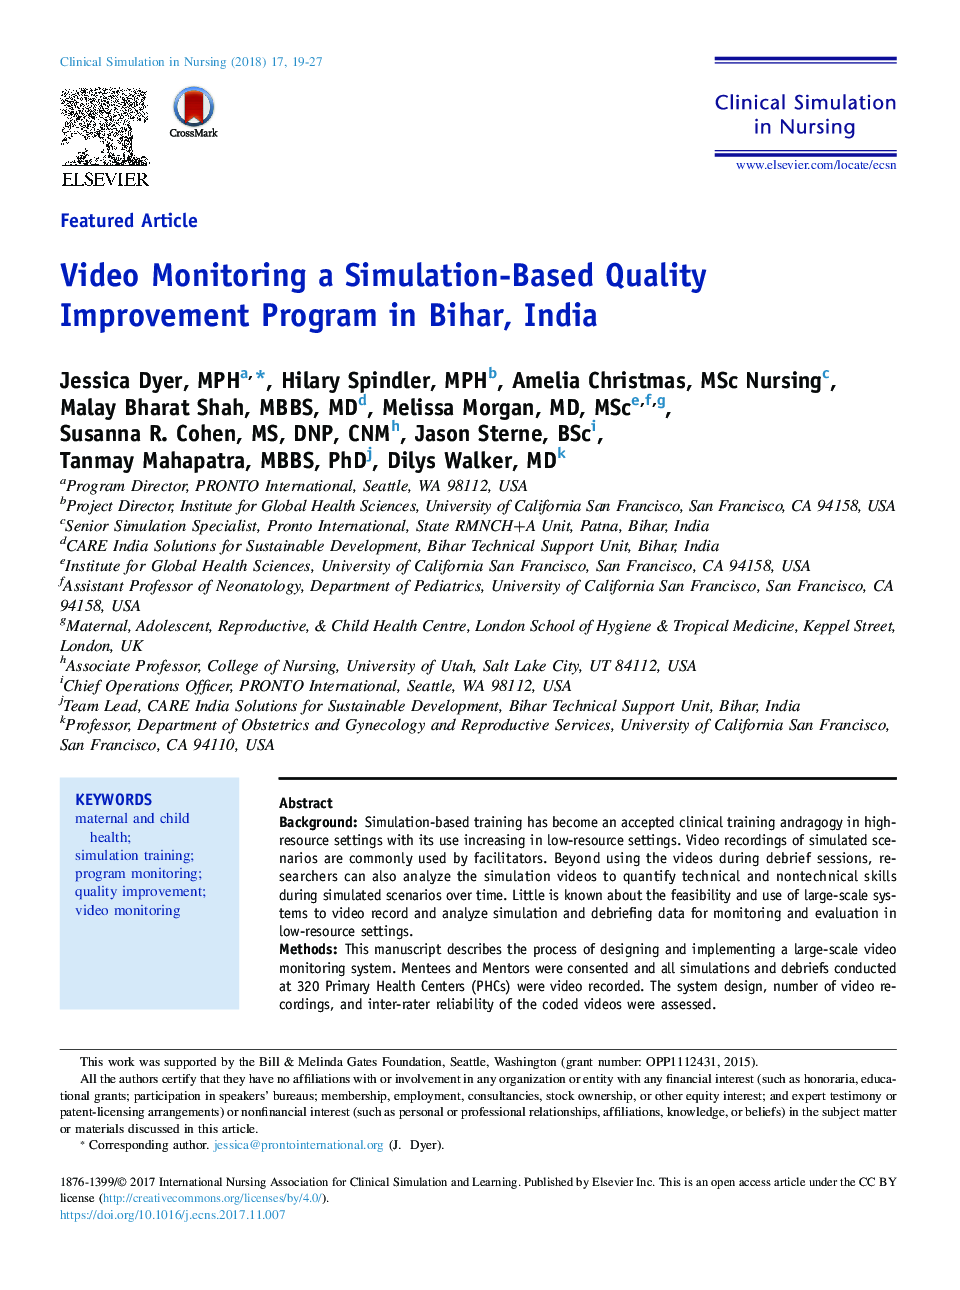 Video Monitoring a Simulation-Based Quality Improvement Program in Bihar, India